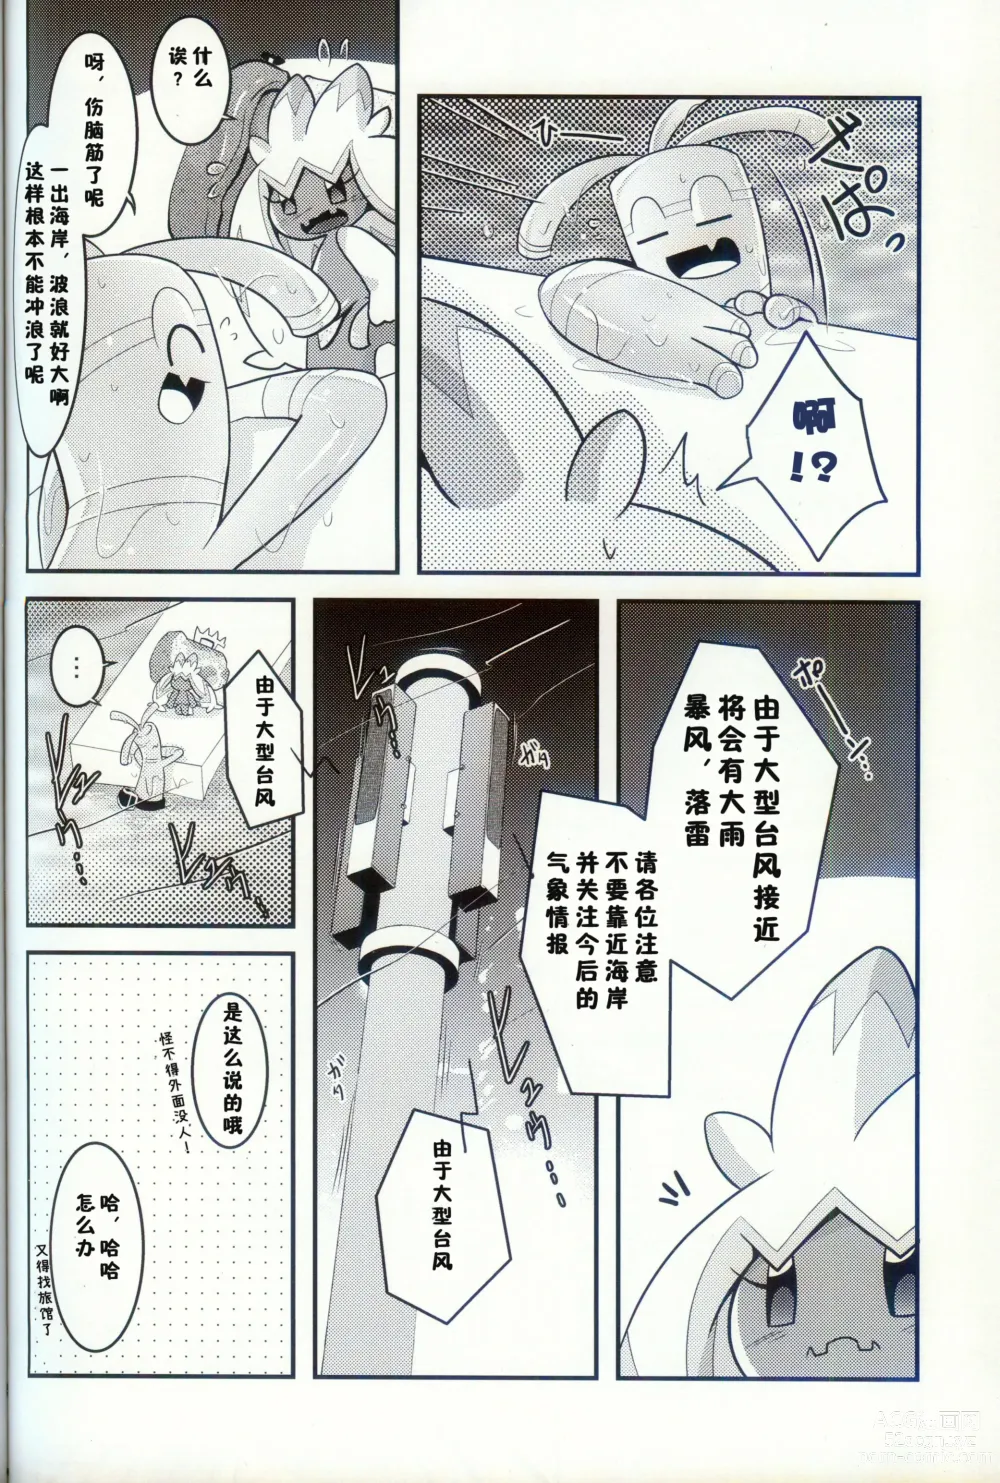 Page 77 of doujinshi 横滨的塞富豪巨锻匠